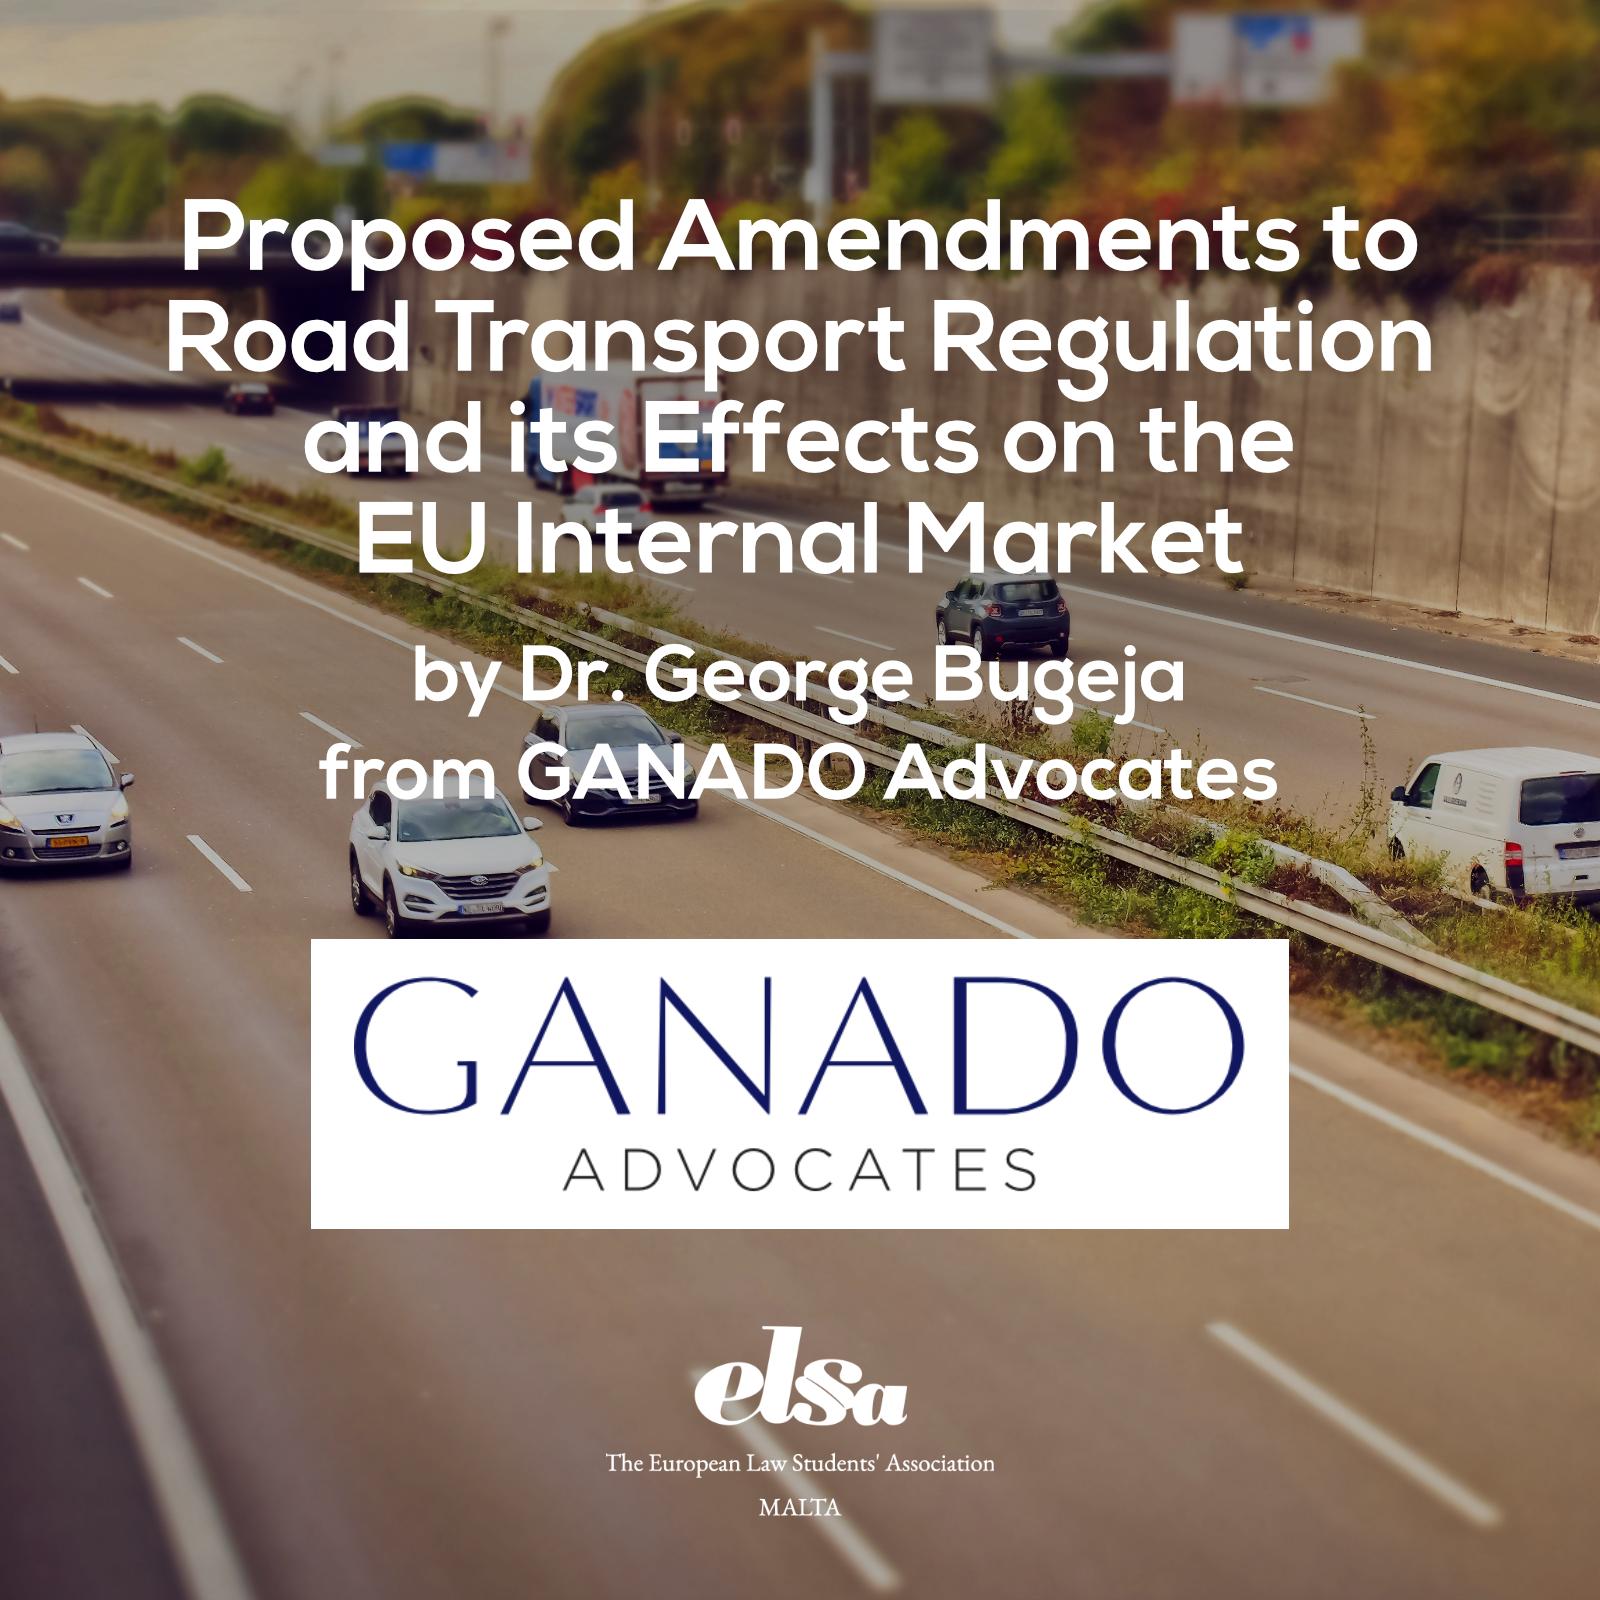 Proposed Amendments to Road Transport Regulation and its Effects on the EU Internal Market